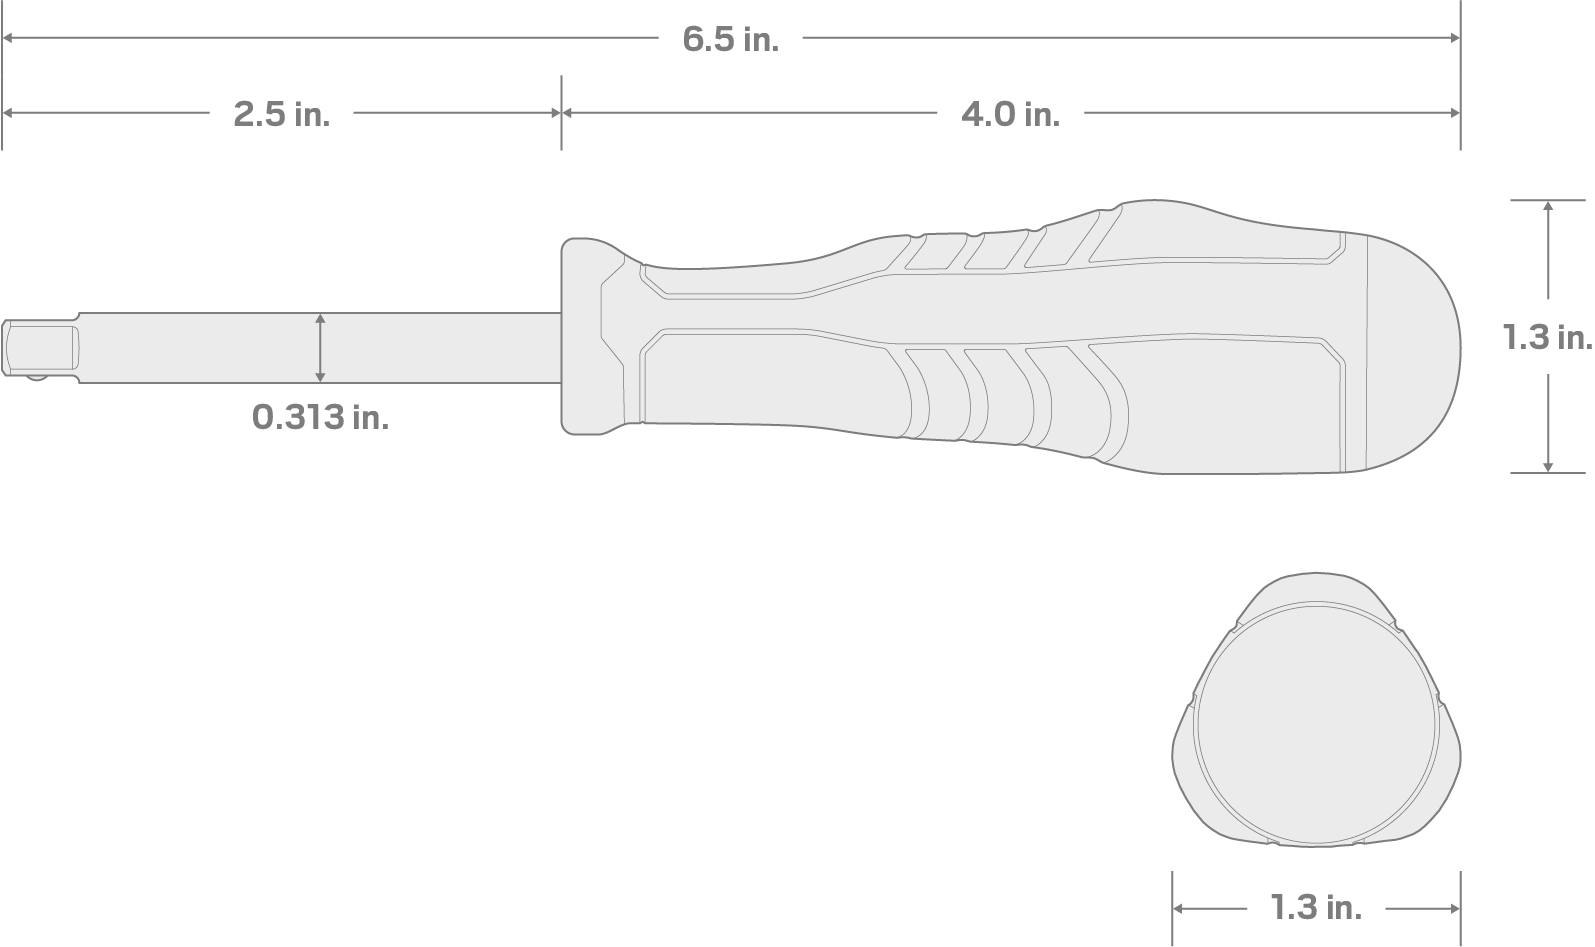 Specs for 1/4 Inch Drive High-Torque Spinner Handle